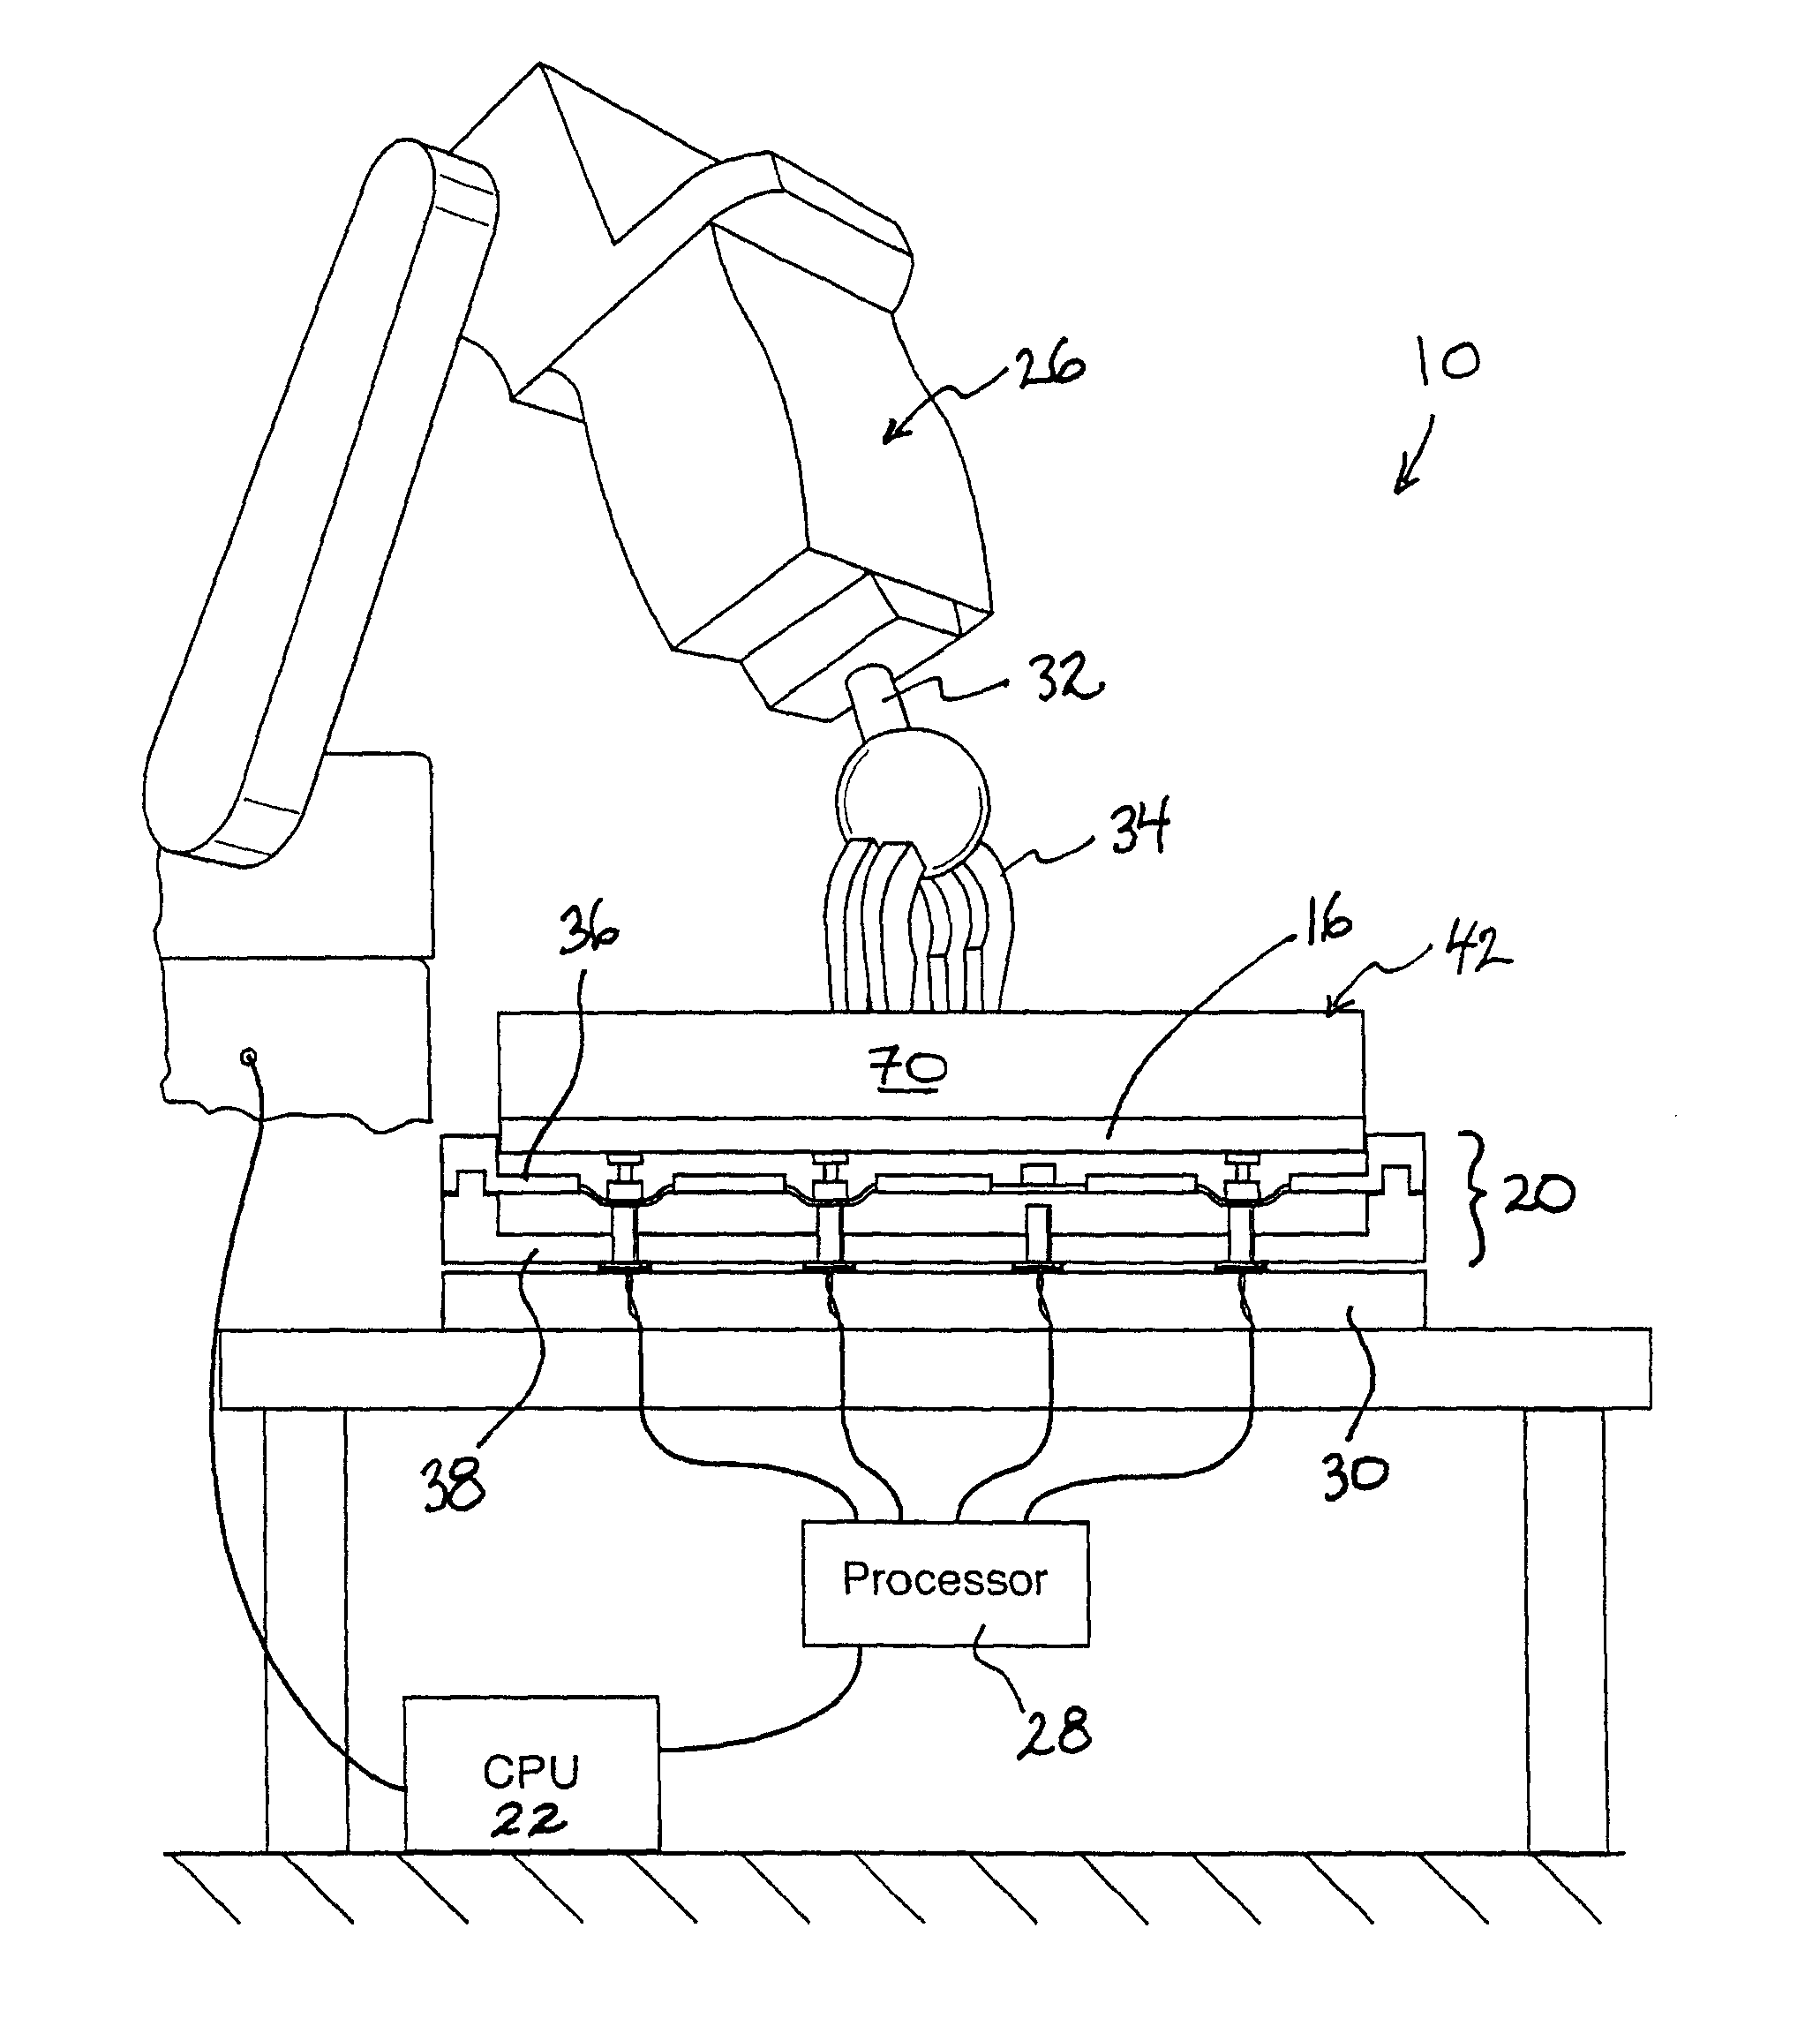 Apparatus for the Automated Testing and Validation of Electronic Components